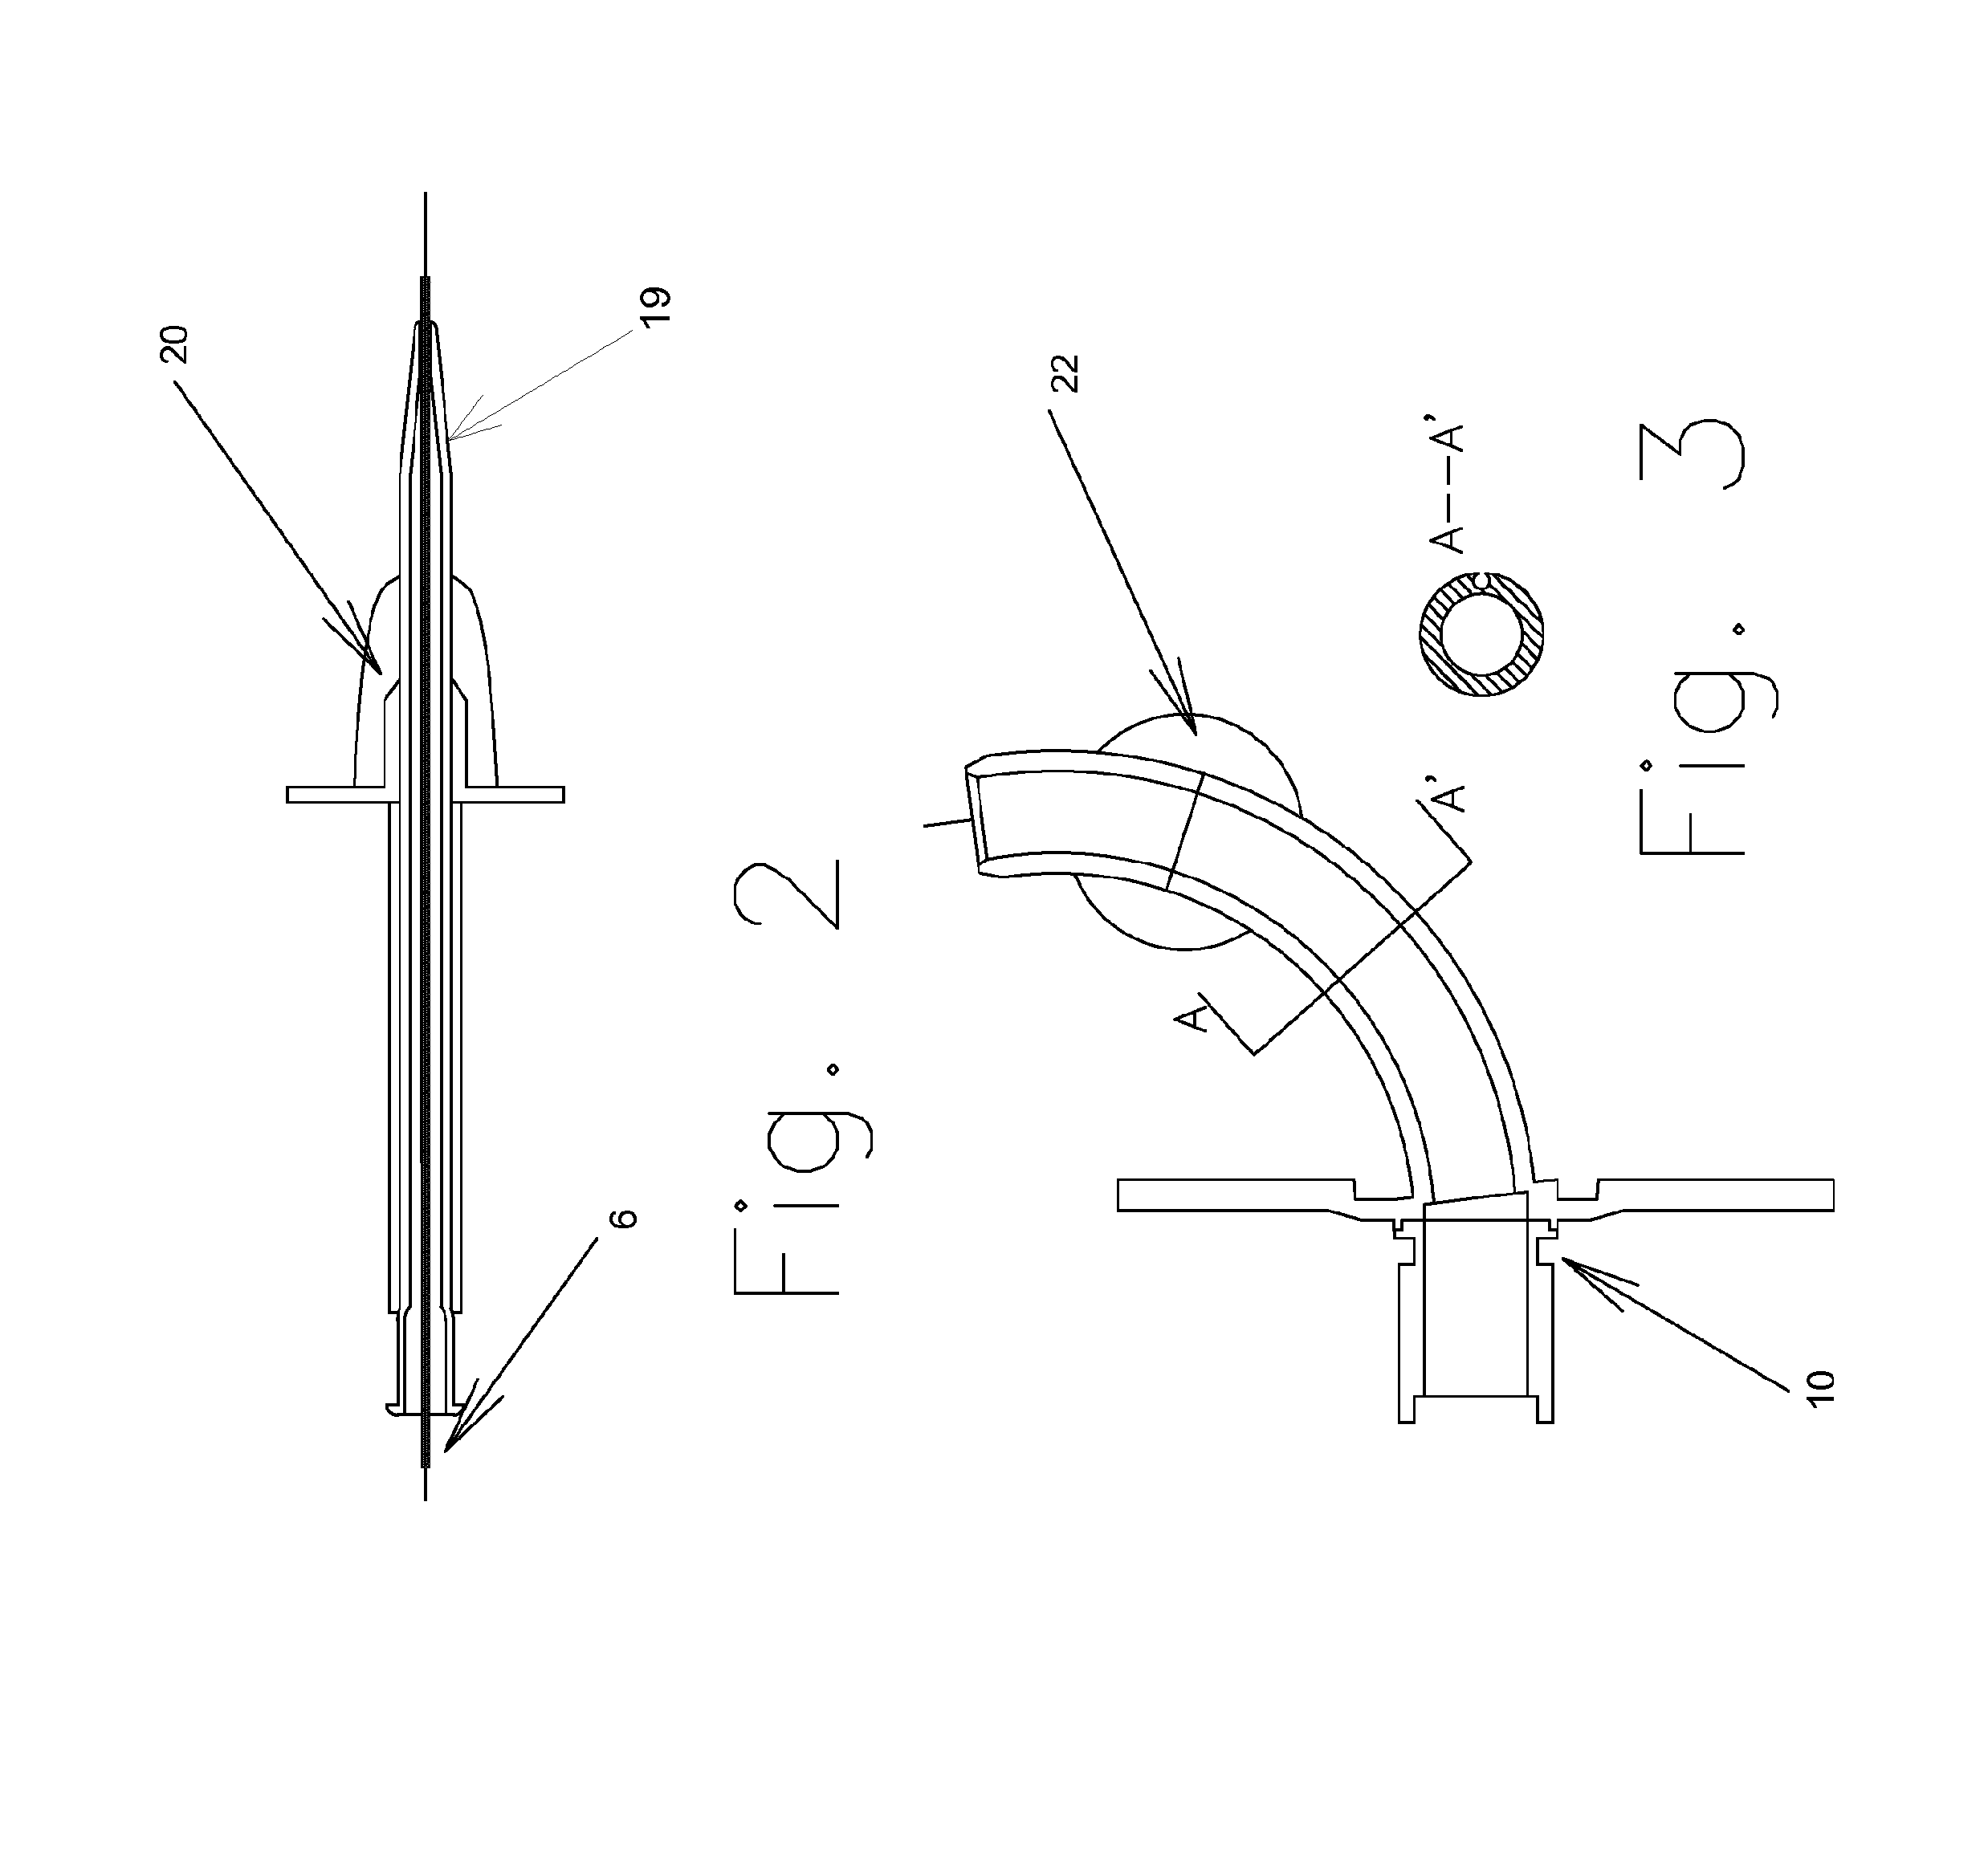 Dilatation system for a medical device